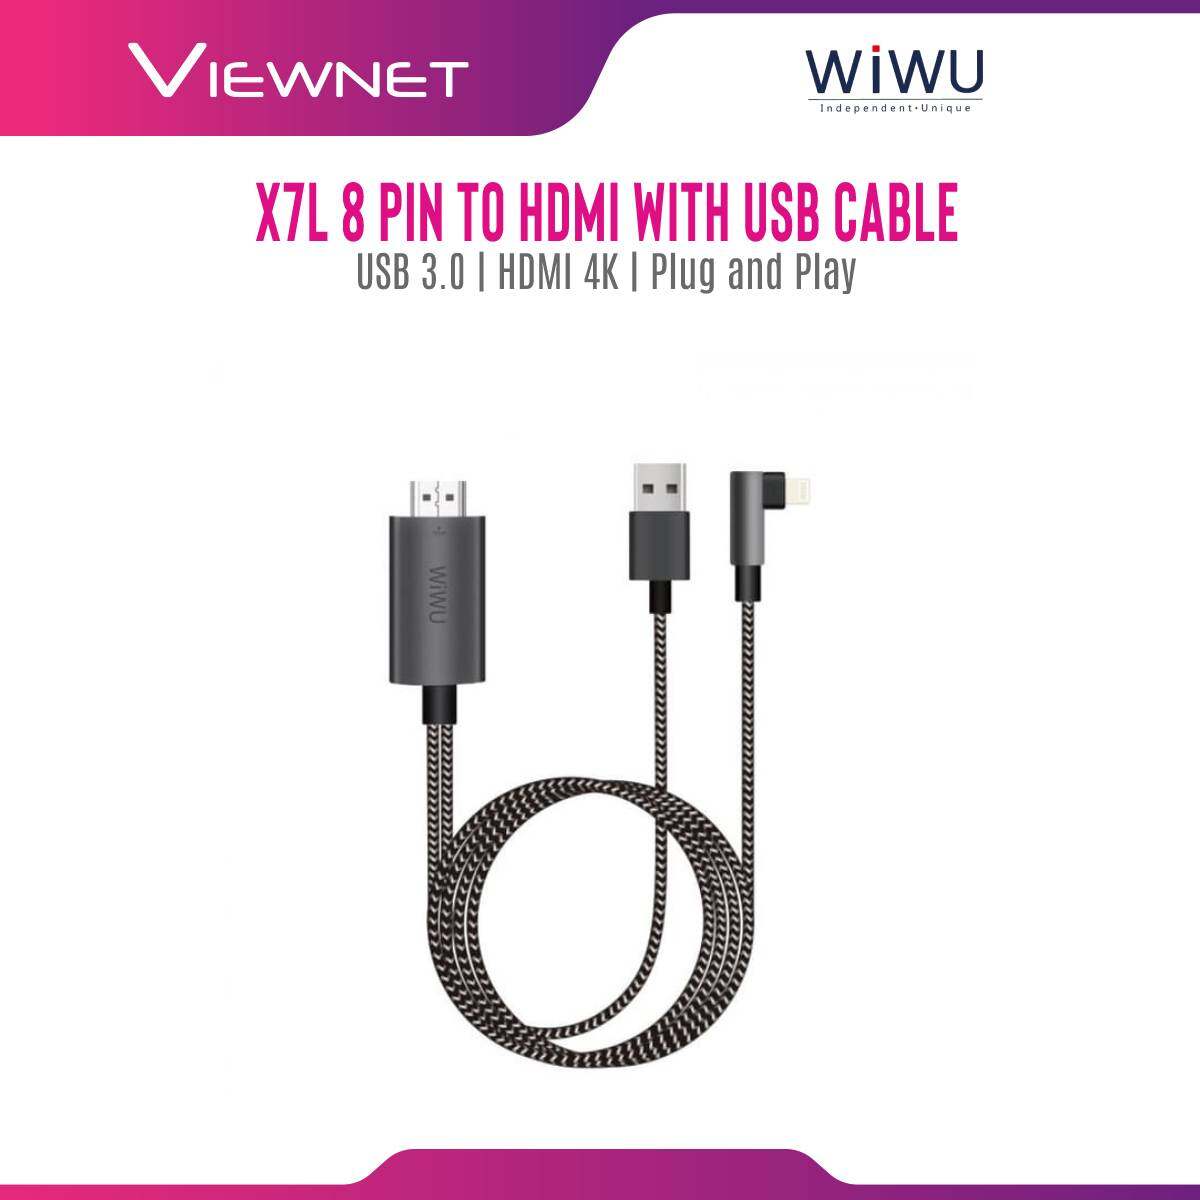 Wiwu X7L 8 Pin To Hdmi With Usb Cable